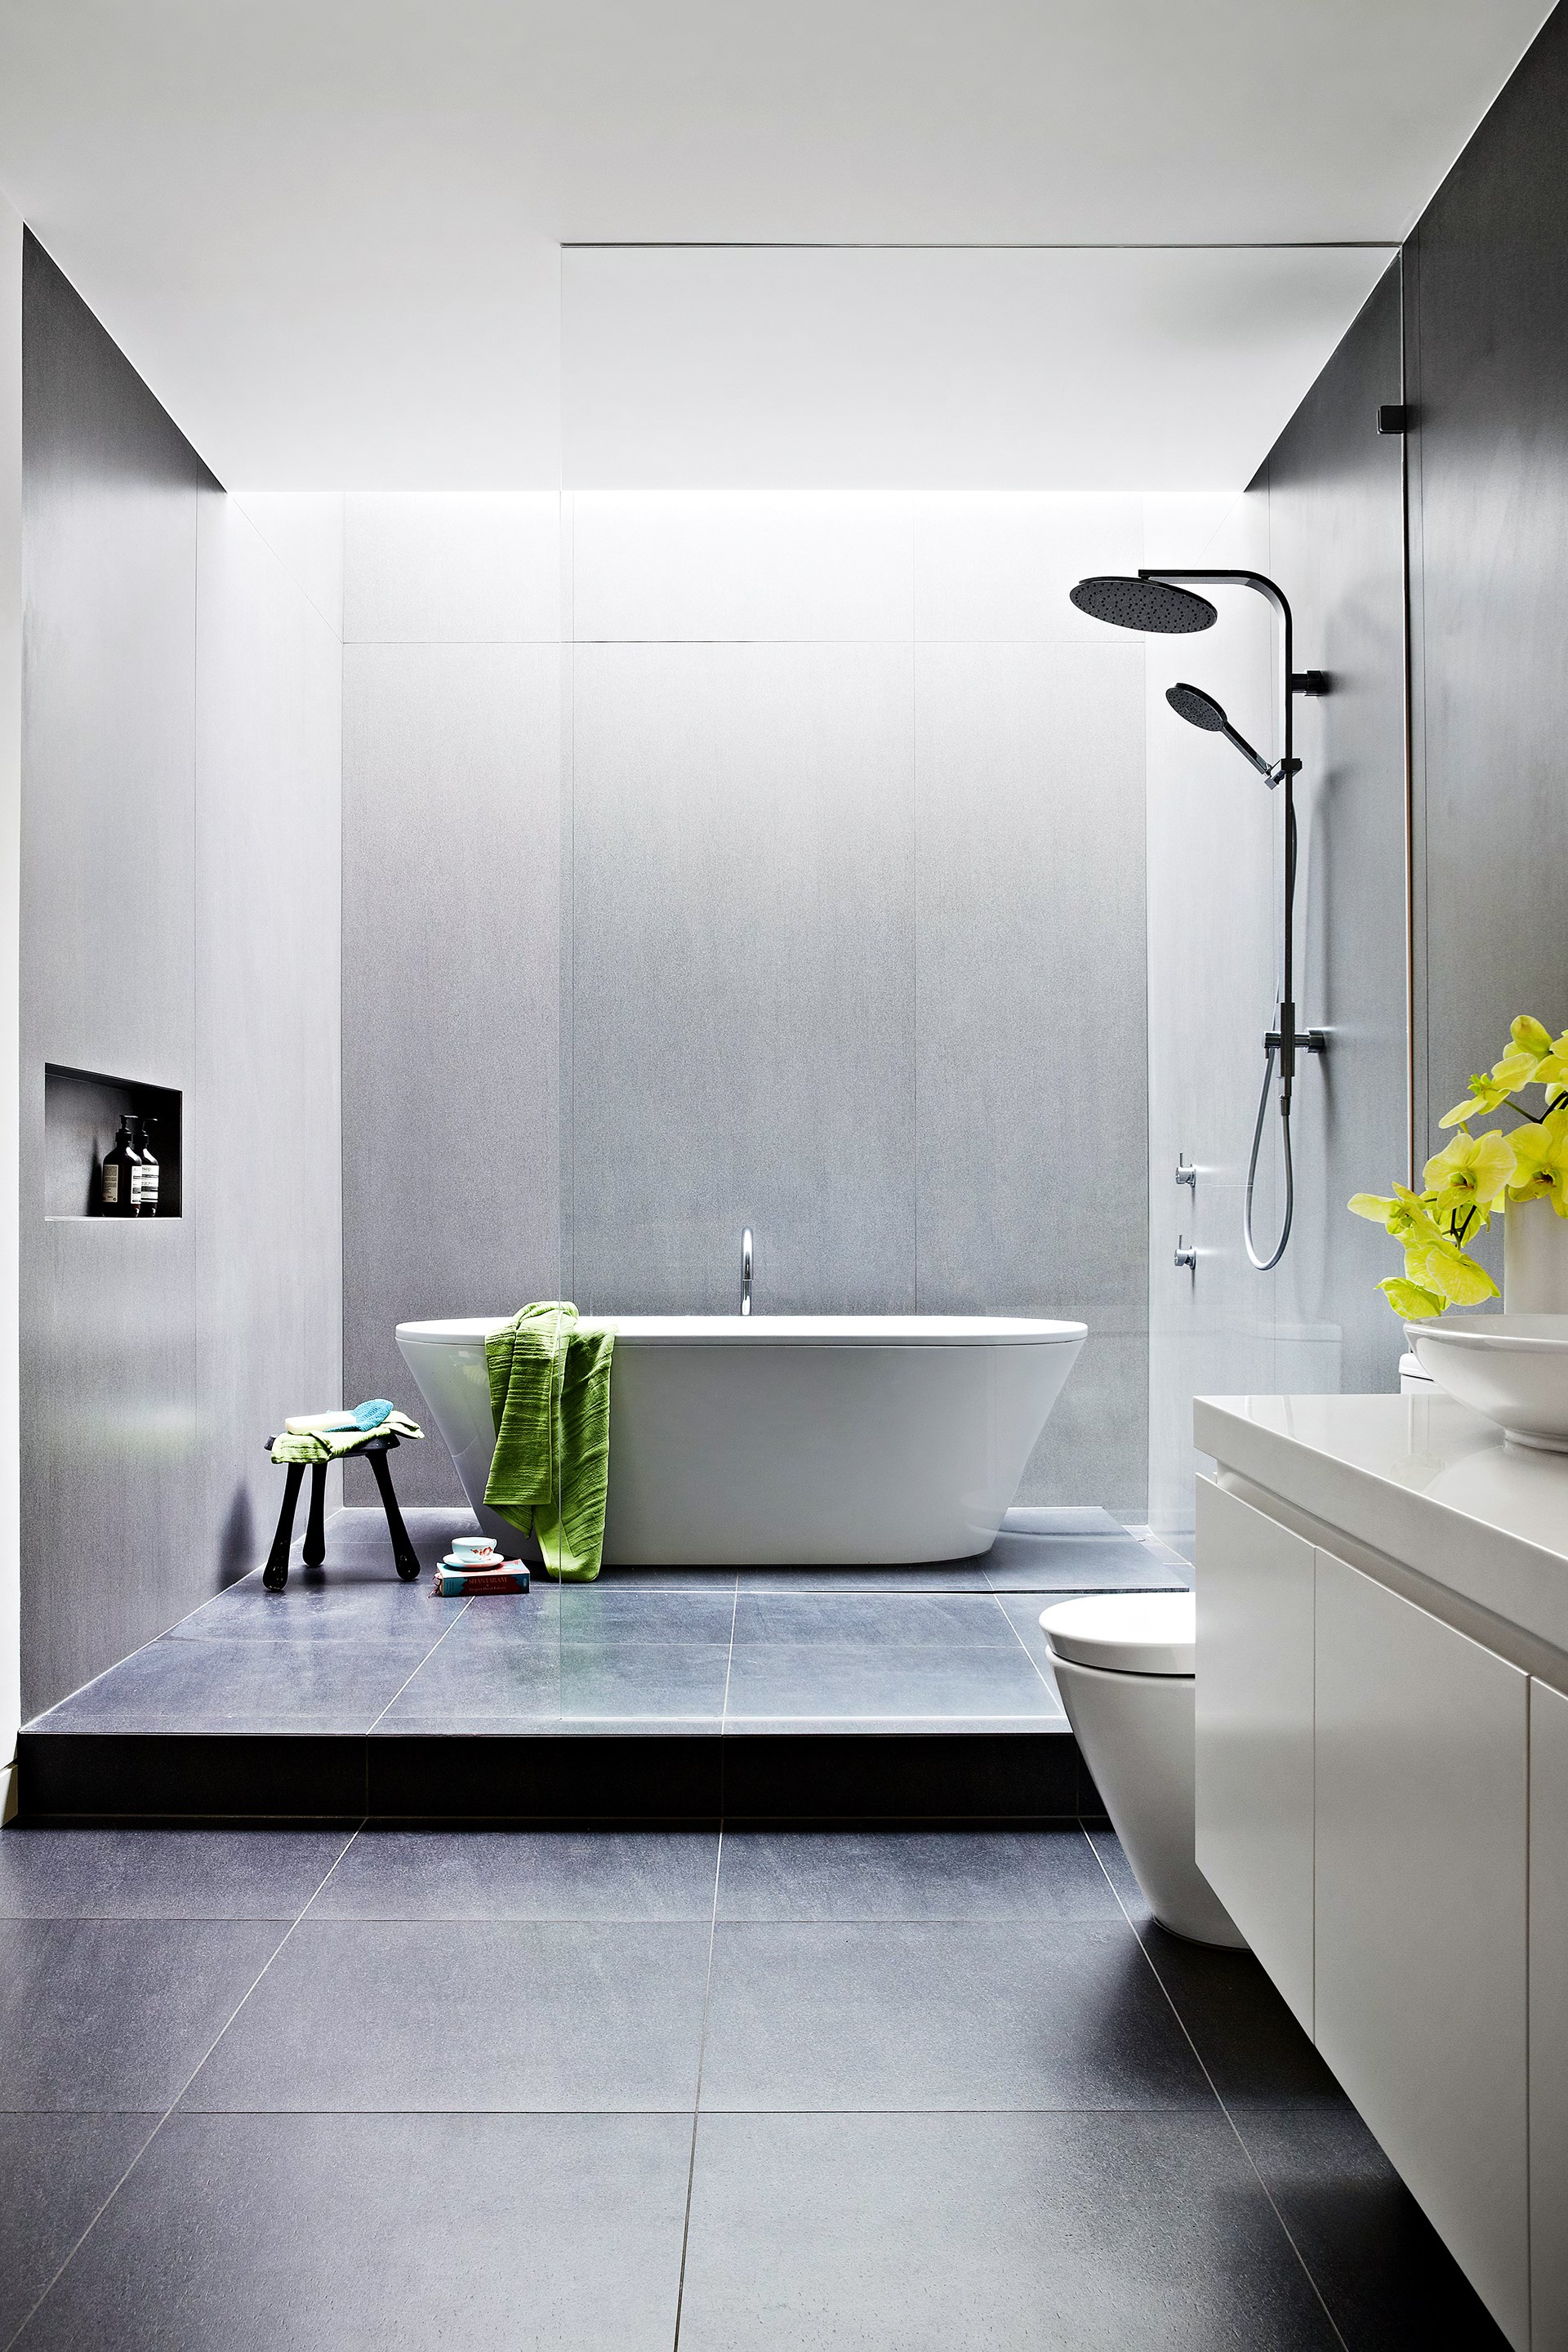 A skylight beams natural light into the cave-like bathroom of this [sleek modern abode](http://www.homestolove.com.au/contemporary-home-celebrates-sunshine-style-and-space-2476|target="_blank"). Photo: Armelle Habib / *Australian House & Garden*